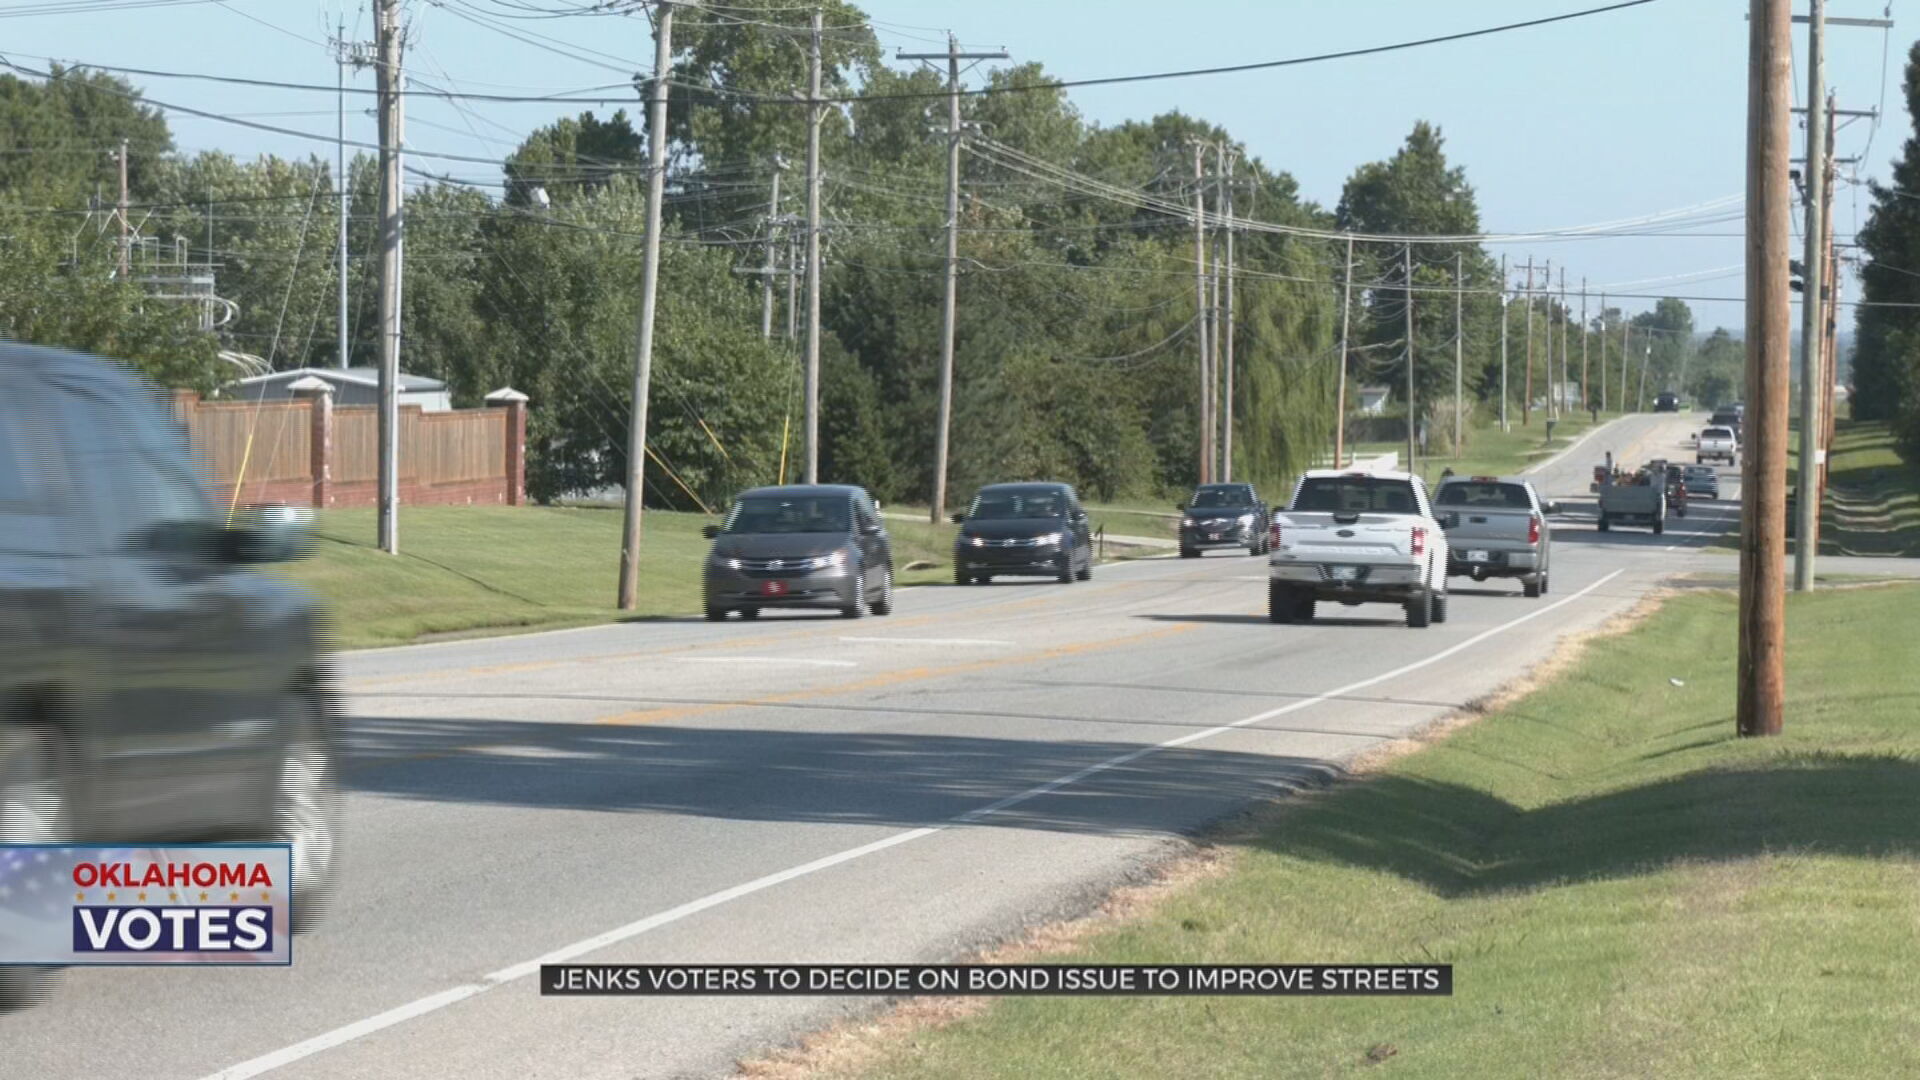 Jenks Voters To Decide On Bond Issue To Improve Streets 